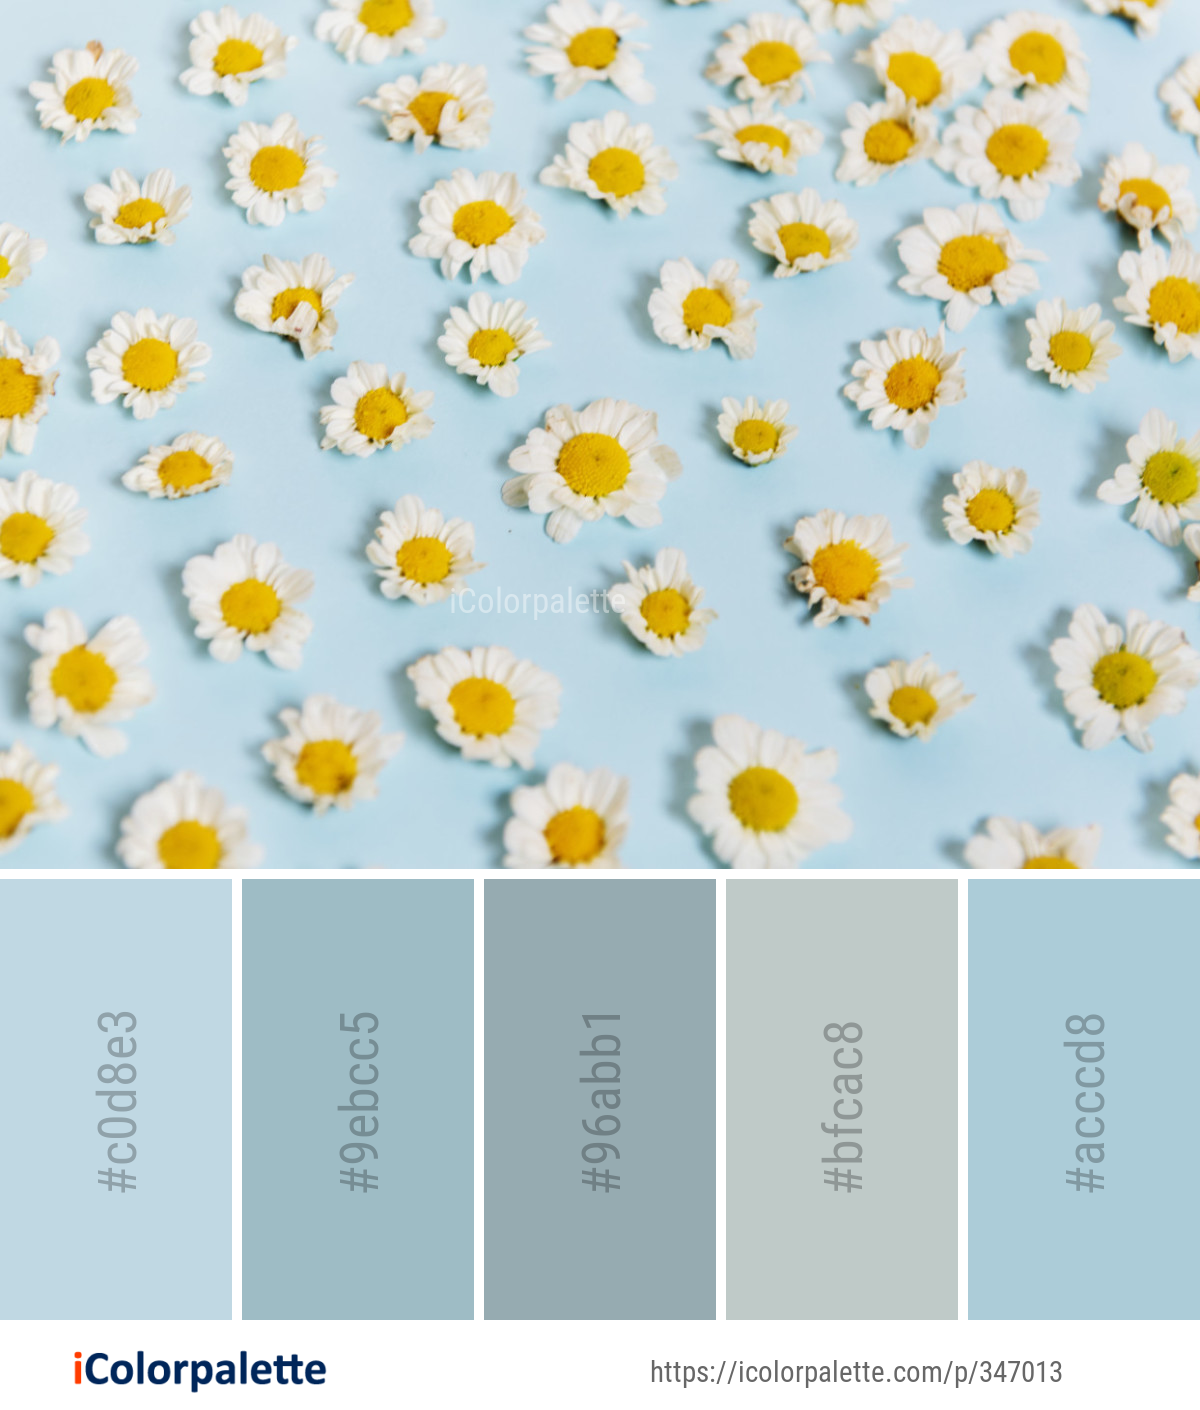 Color Palette Ideas from Flower Yellow Sunflower Image